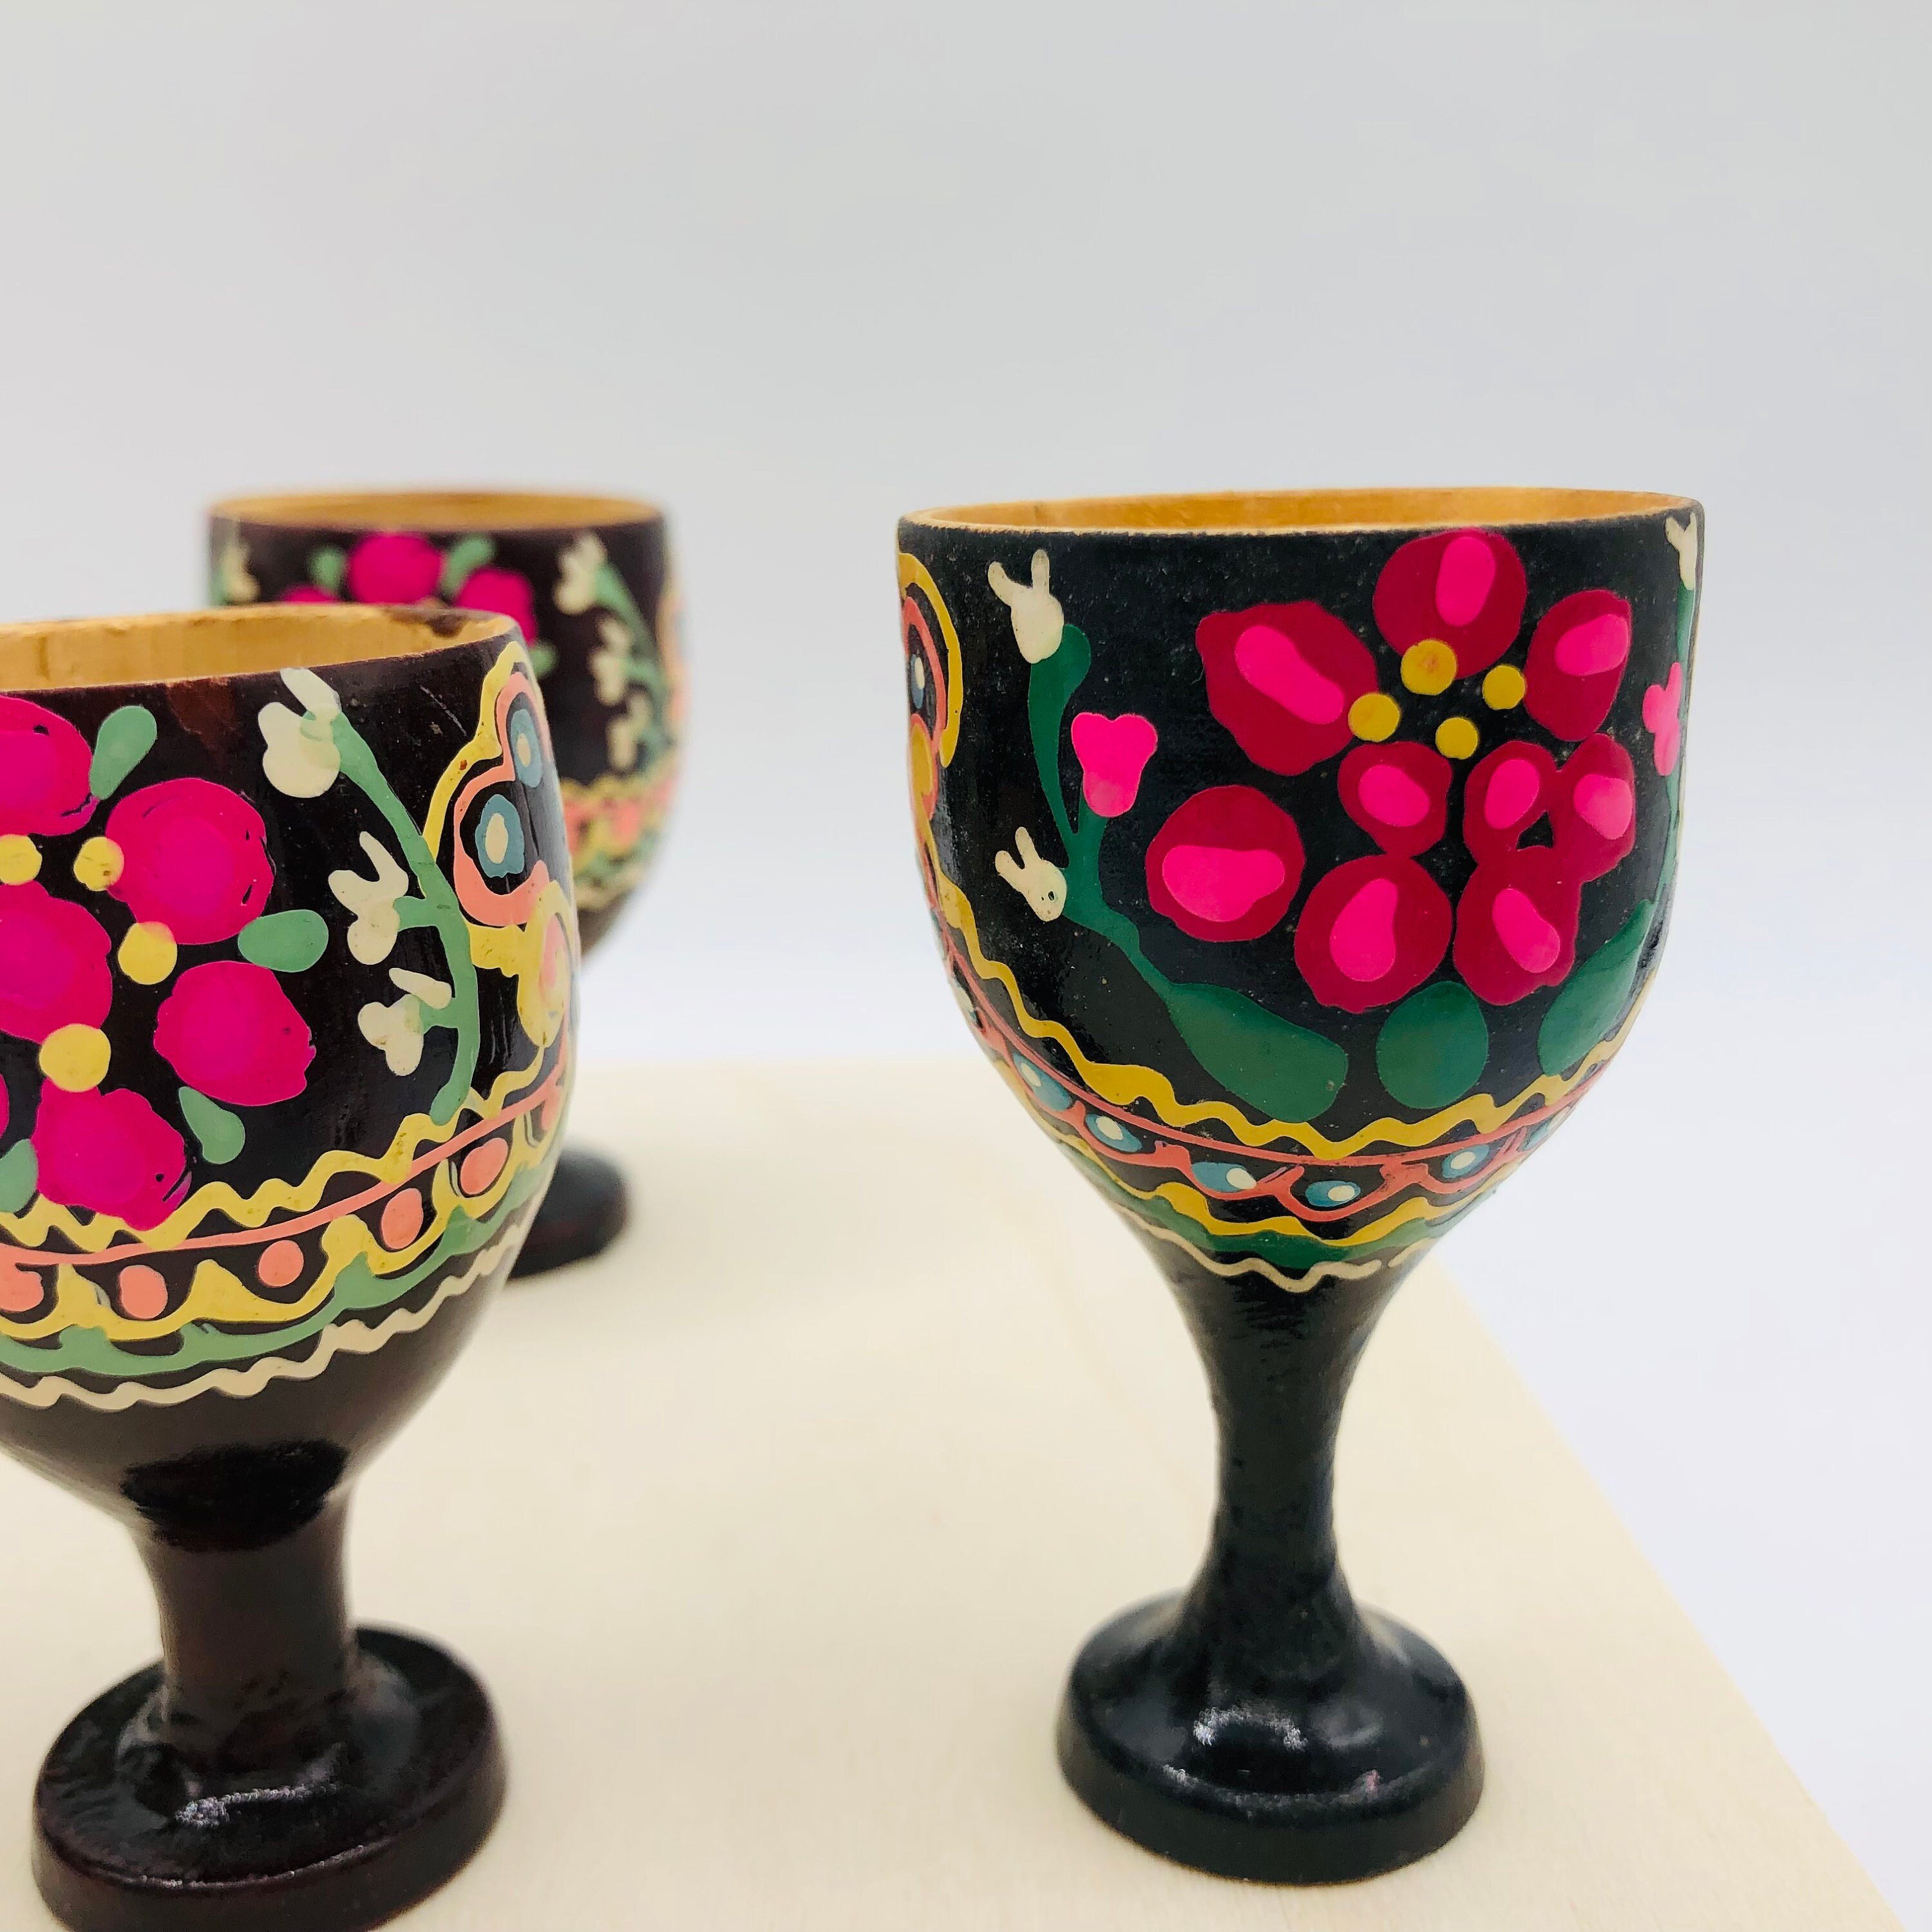 A Pair of Vintage Wood and Pastic Egg Cups, Hand Painted, Single Egg Cups,  Floral Motif, Wooden Base 